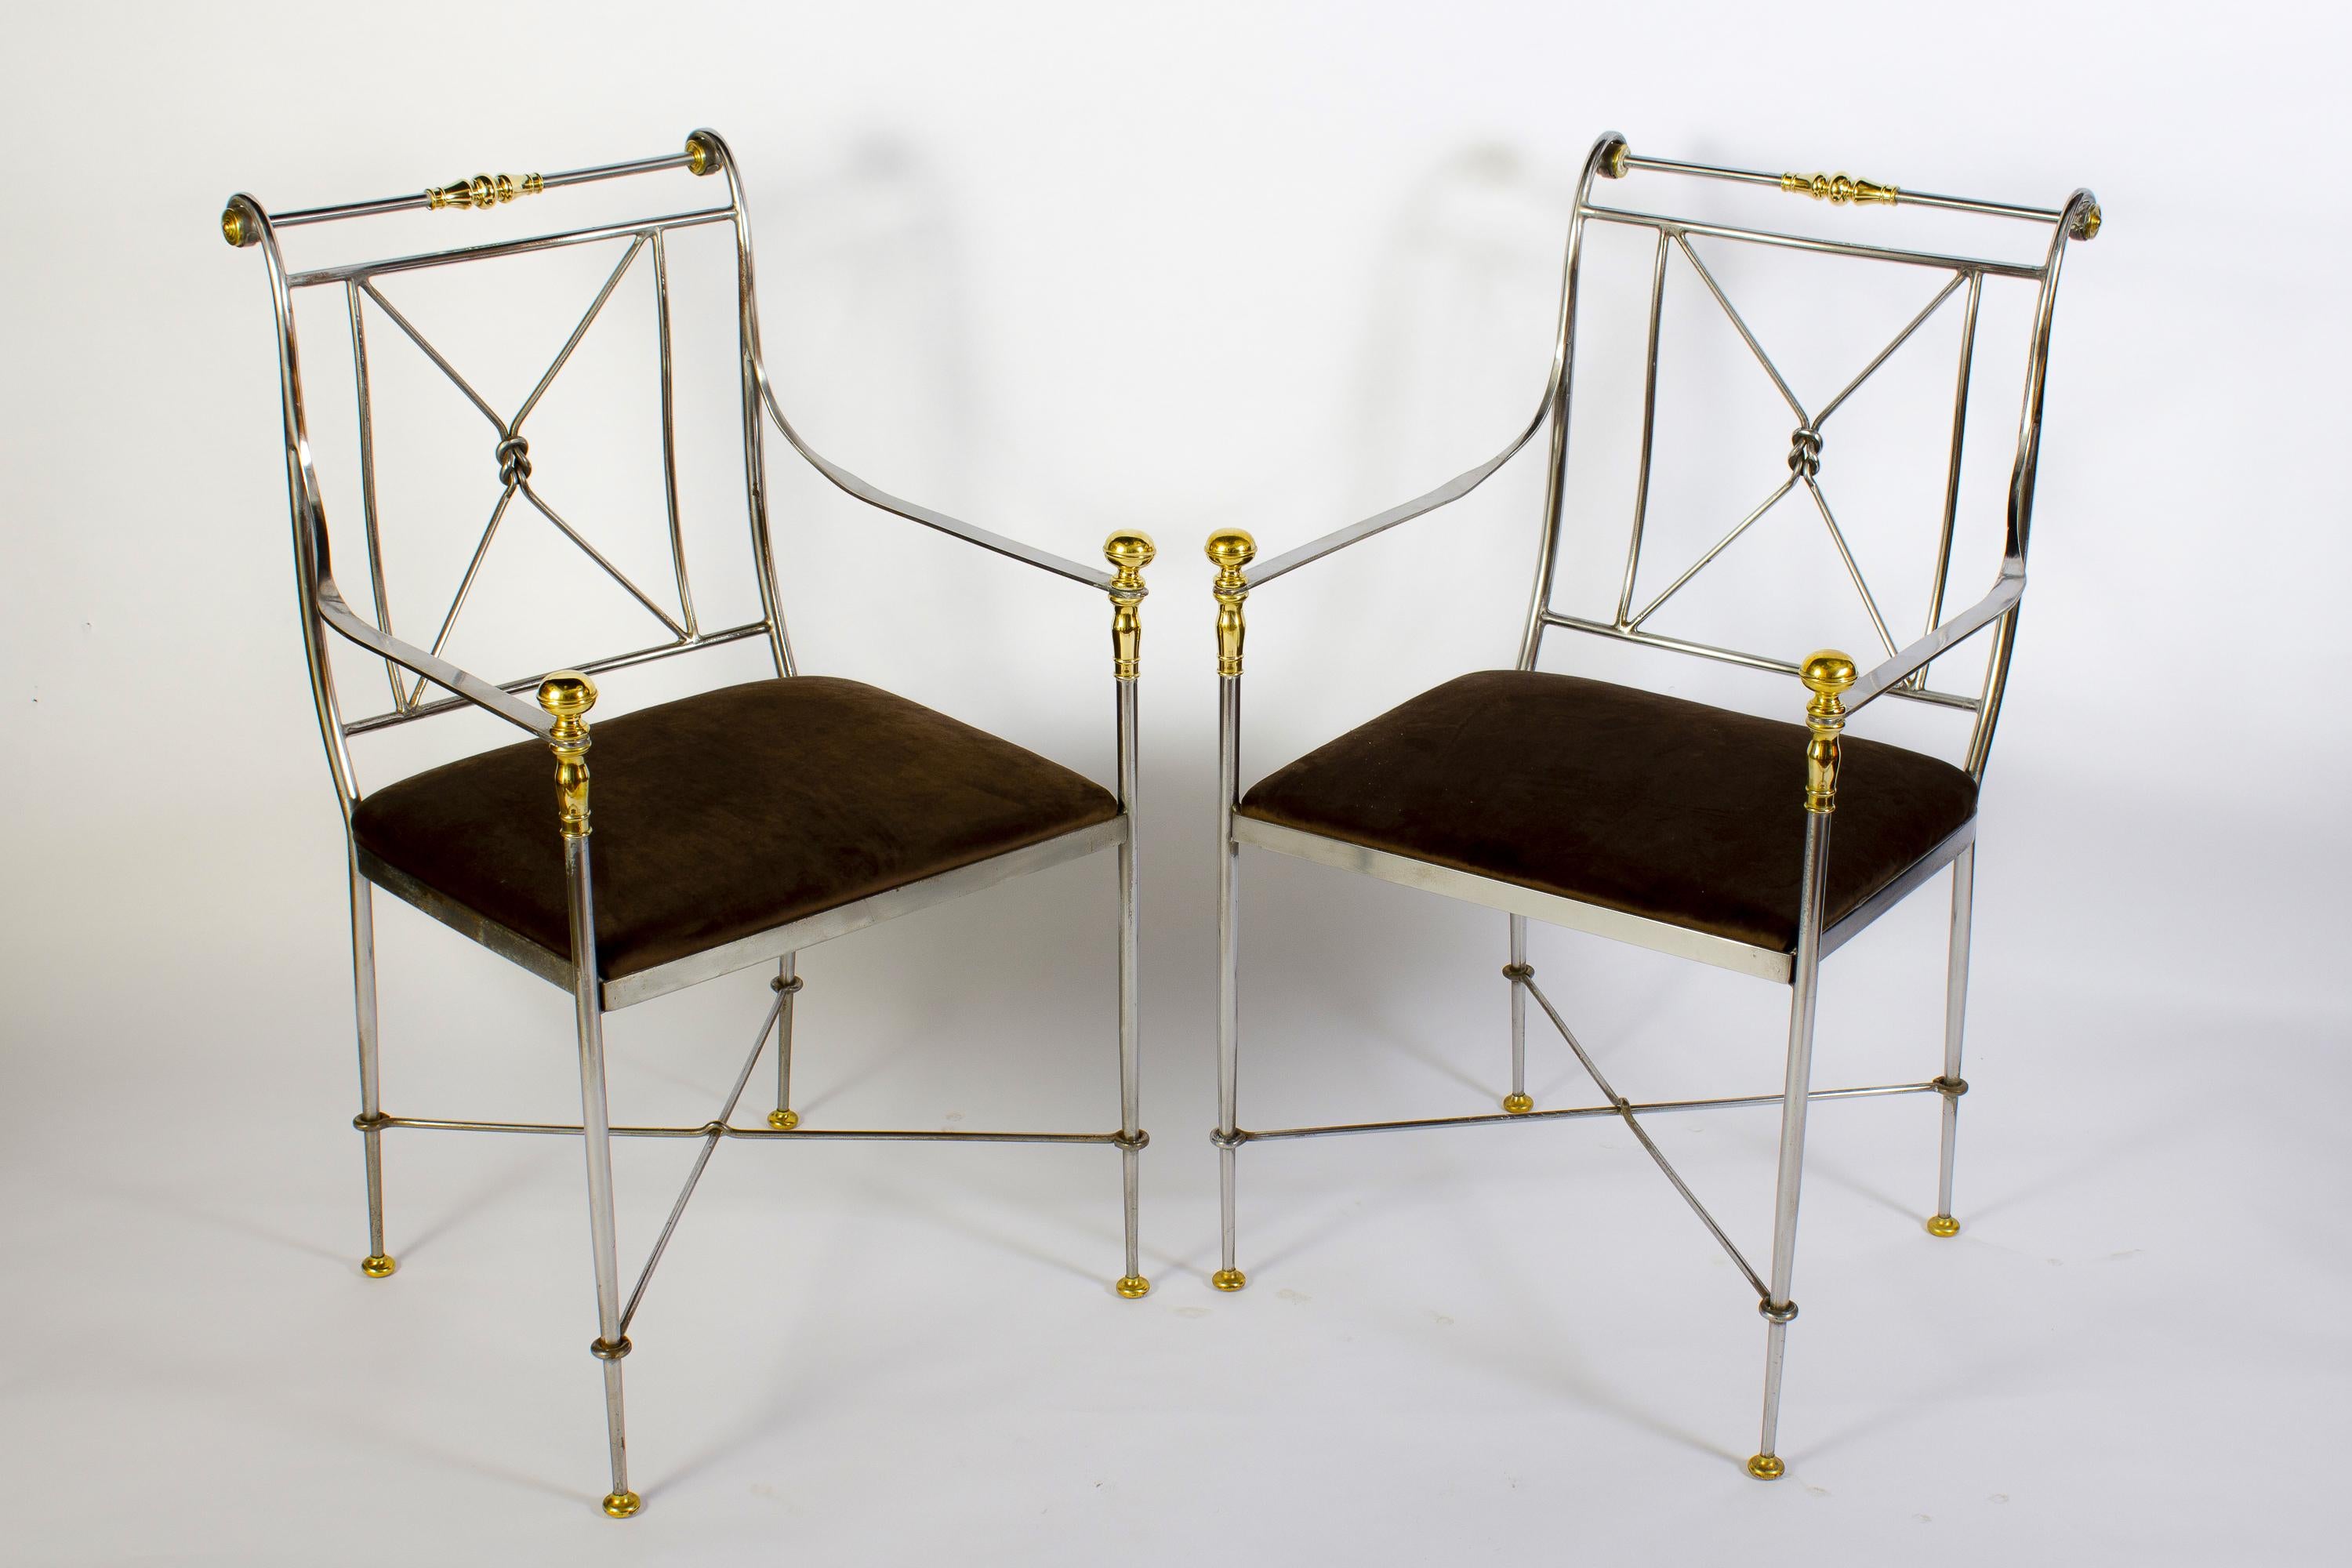 A pair of Italian steel and brass armchairs with dark velvet seats.
Made in Italy and featuring polished steel, solid cast brass.
Each chair has been masterfully welded, crafted, absolutely wonderful proportions and is comfortable.
Perfect in a